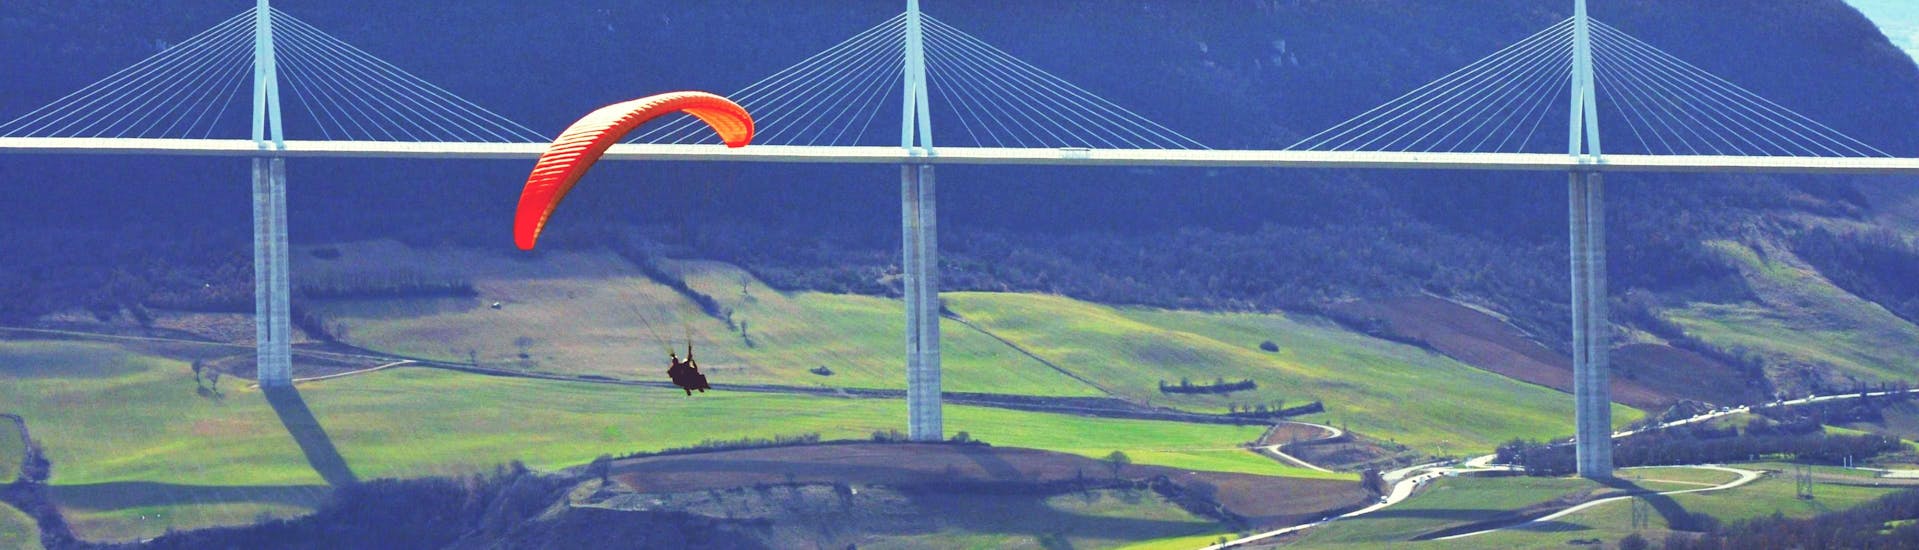 A paragliding pilot from Air Magic Parapente is doing a Tandem Paragliding Flight "XXL" in front of the Millau Viaduct.